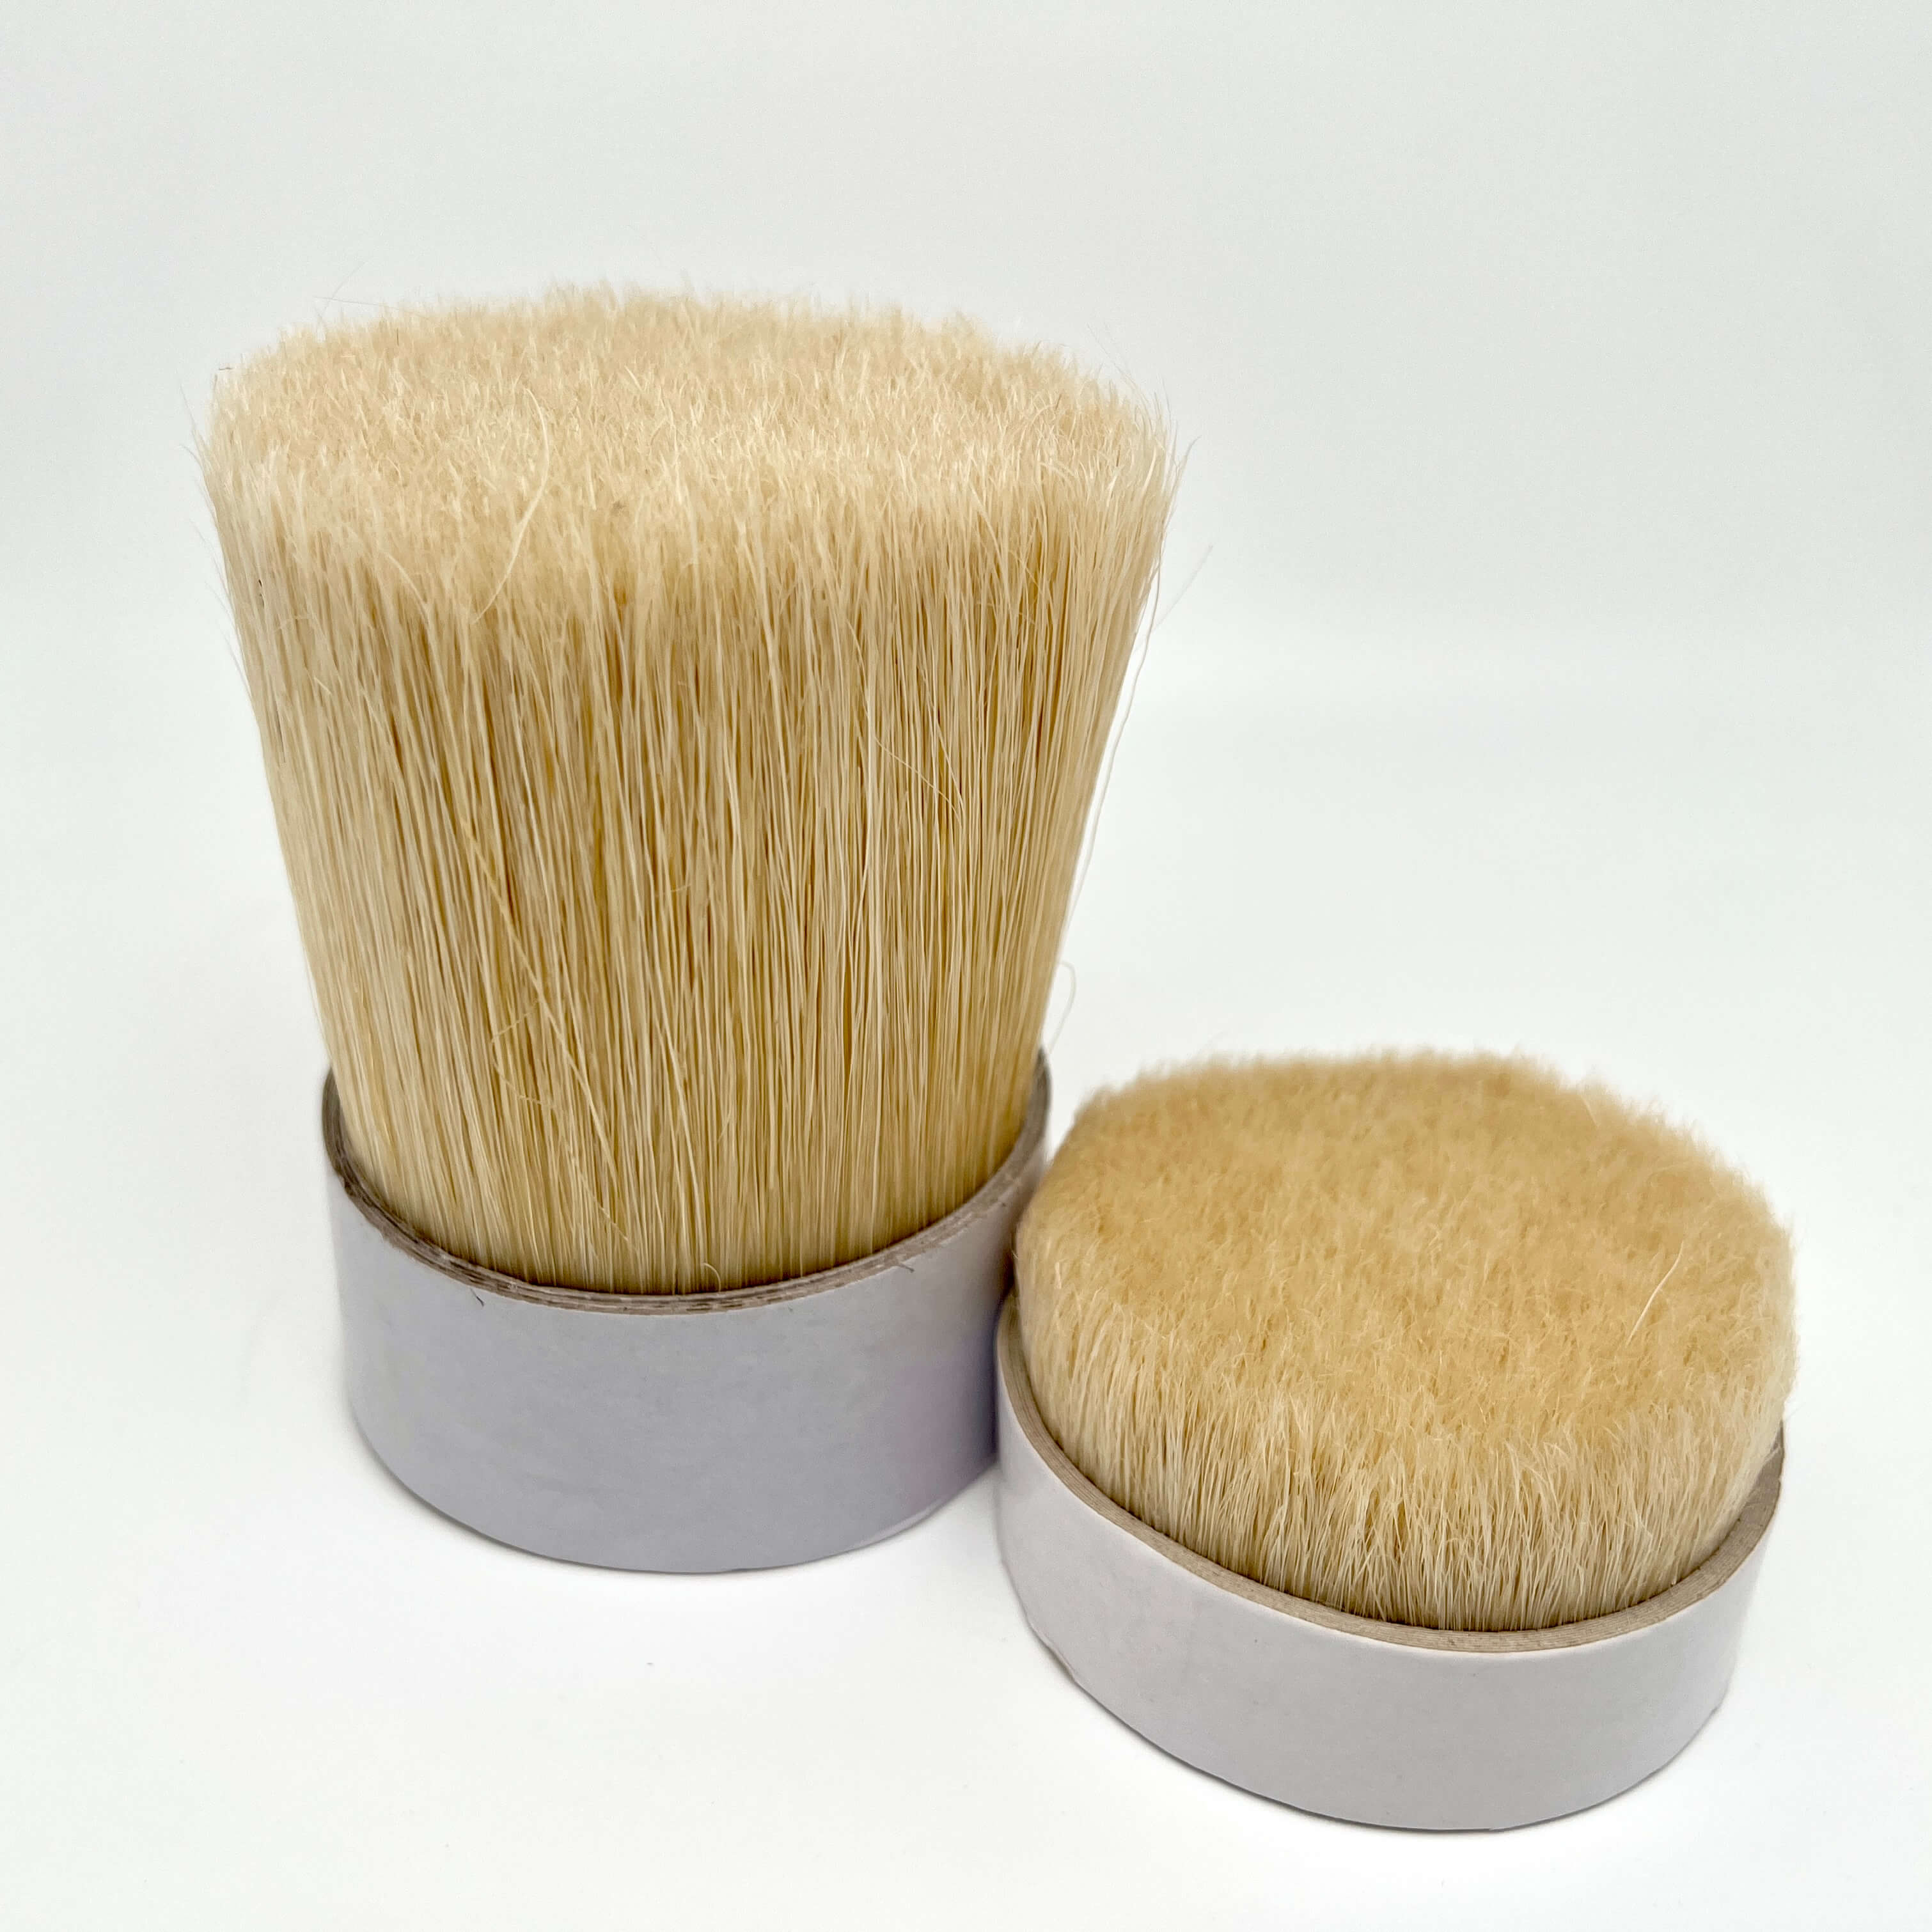 SDN Brush Materials can make your brushes outstanding in any market!